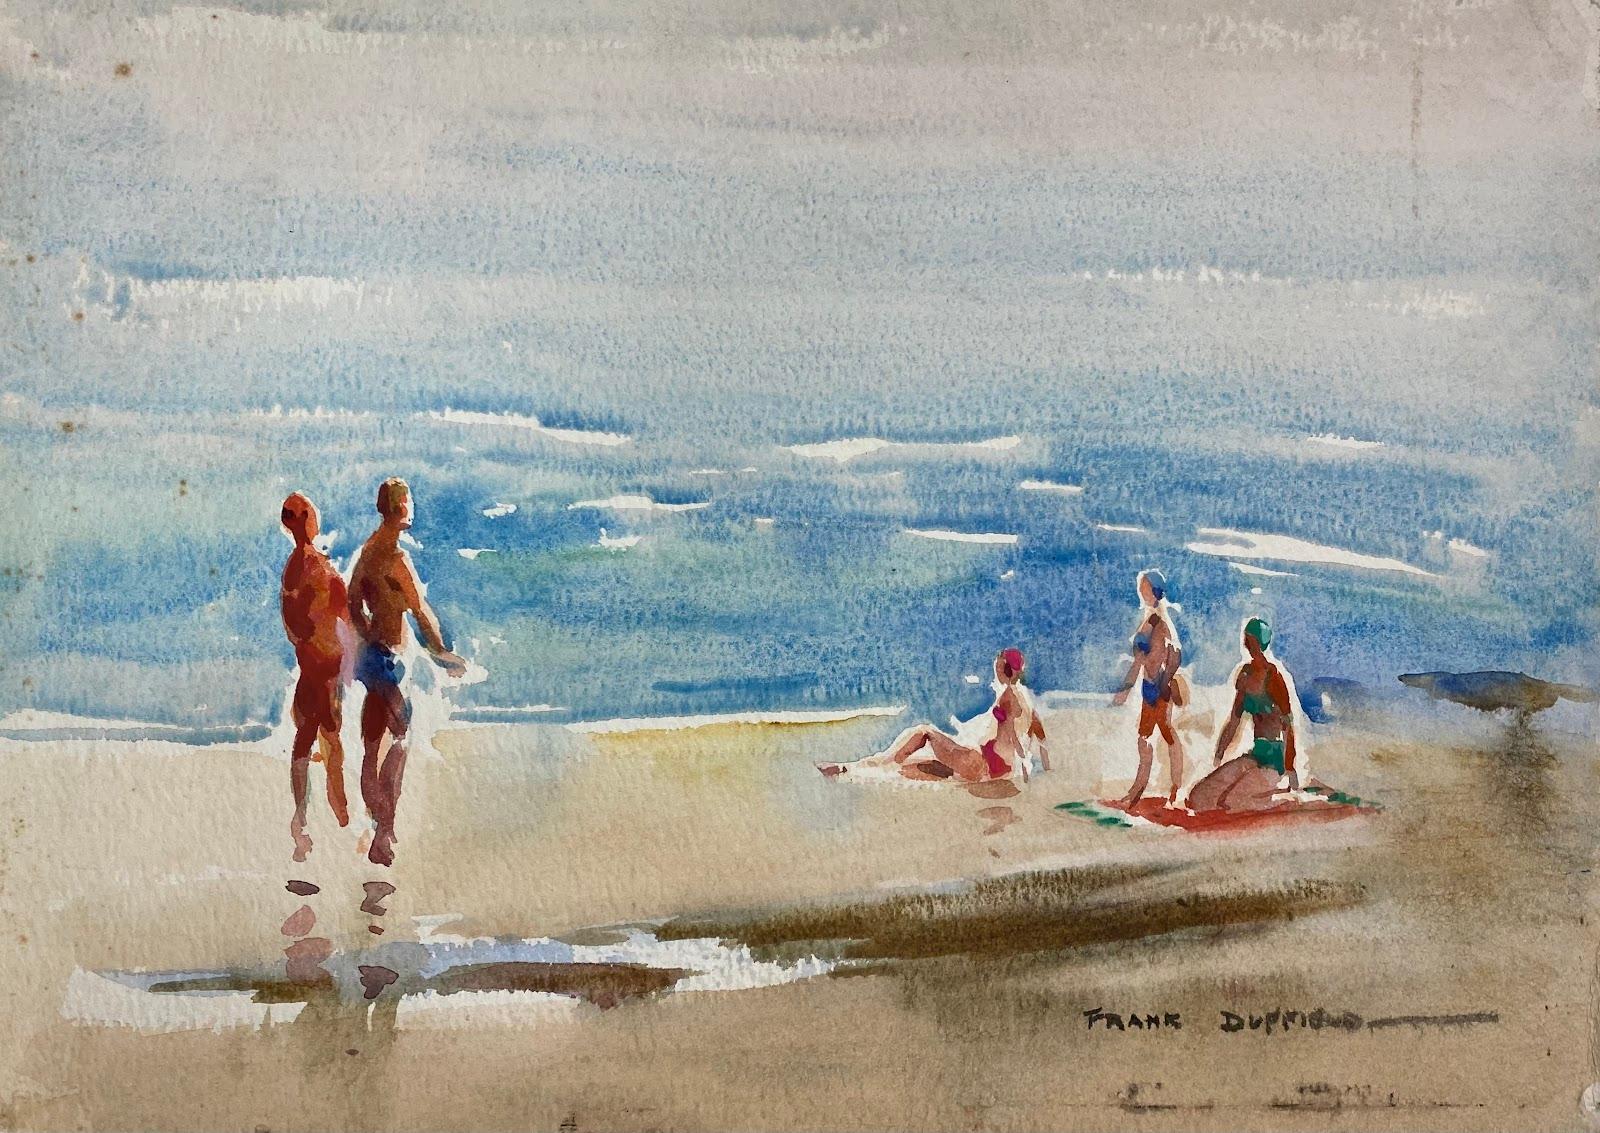 Frank Duffield Abstract Drawing - British Mid 20th Century Impressionist Painting Day At The Beach 